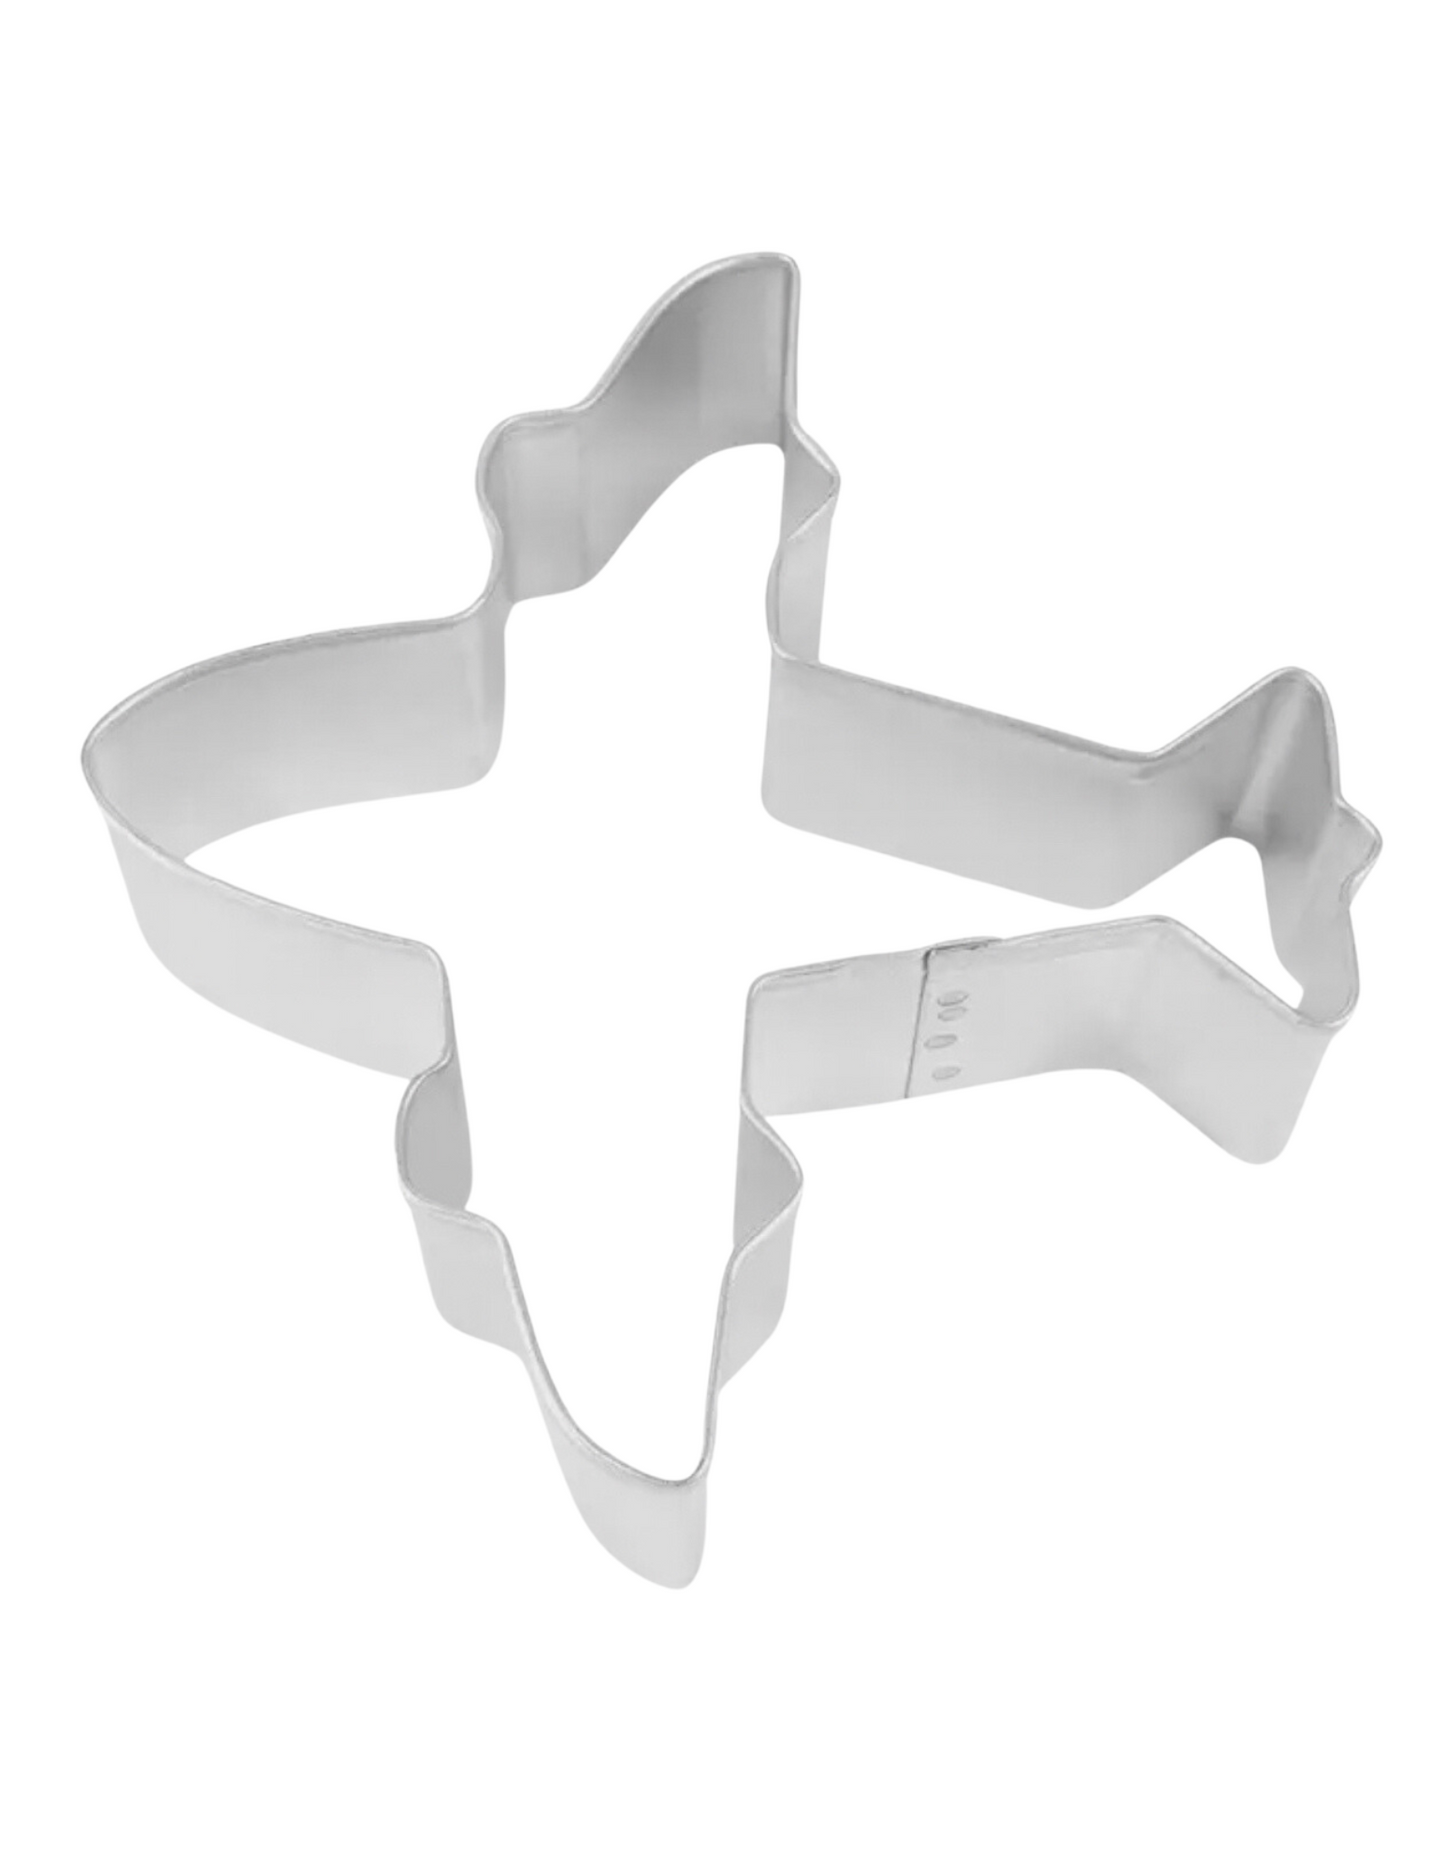 Airplane Cookie Cutter 4" Carded